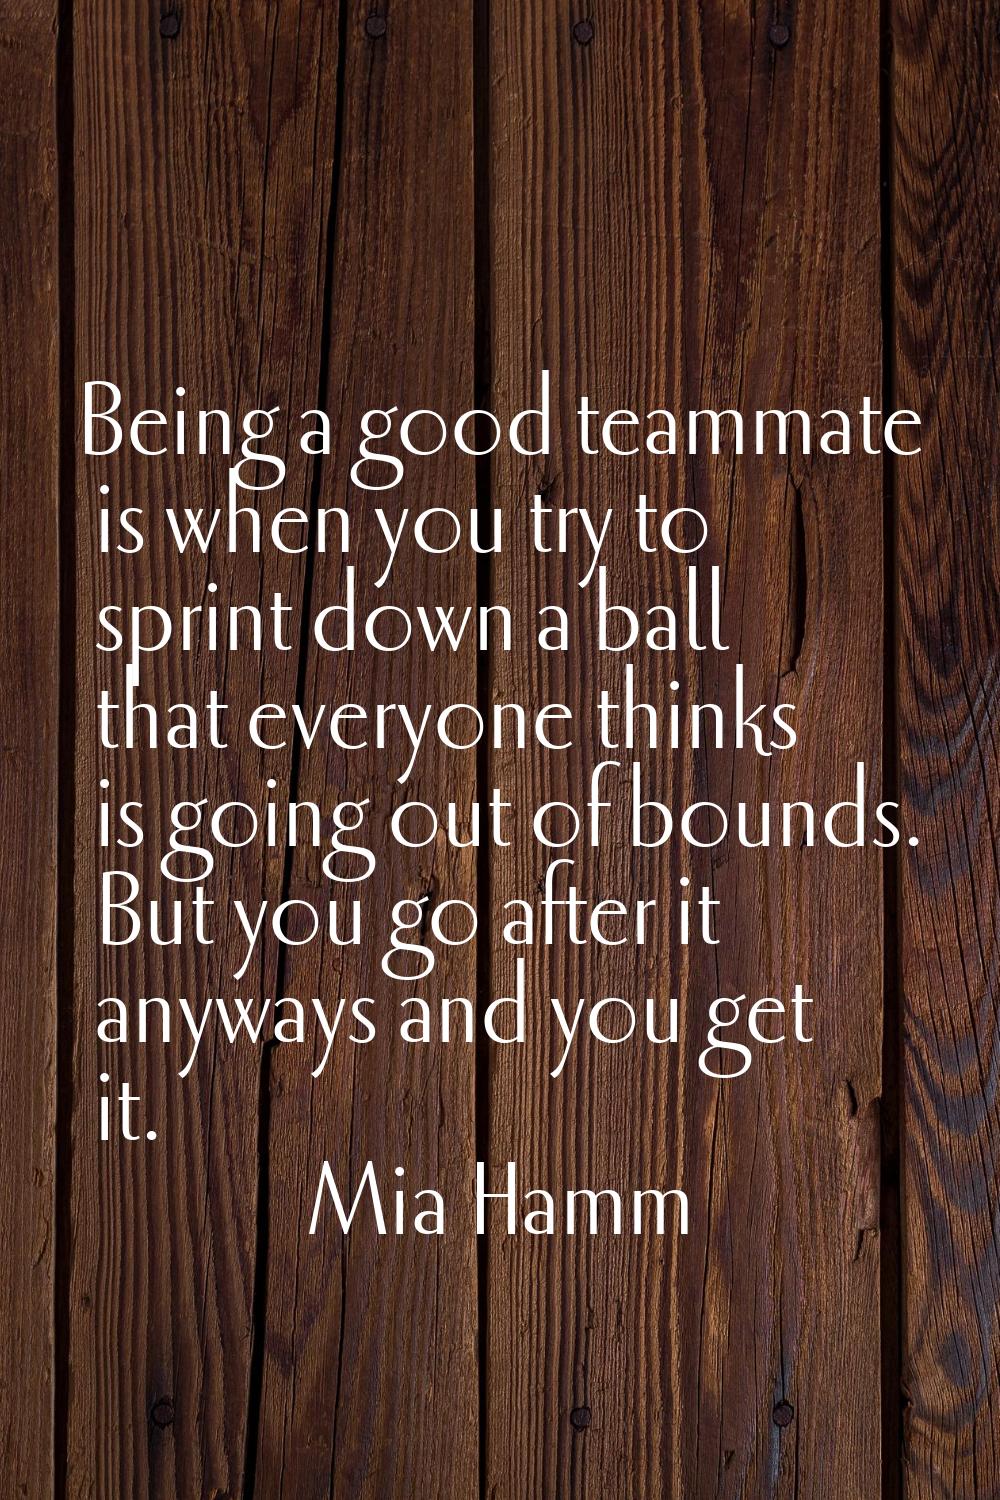 Being a good teammate is when you try to sprint down a ball that everyone thinks is going out of bo